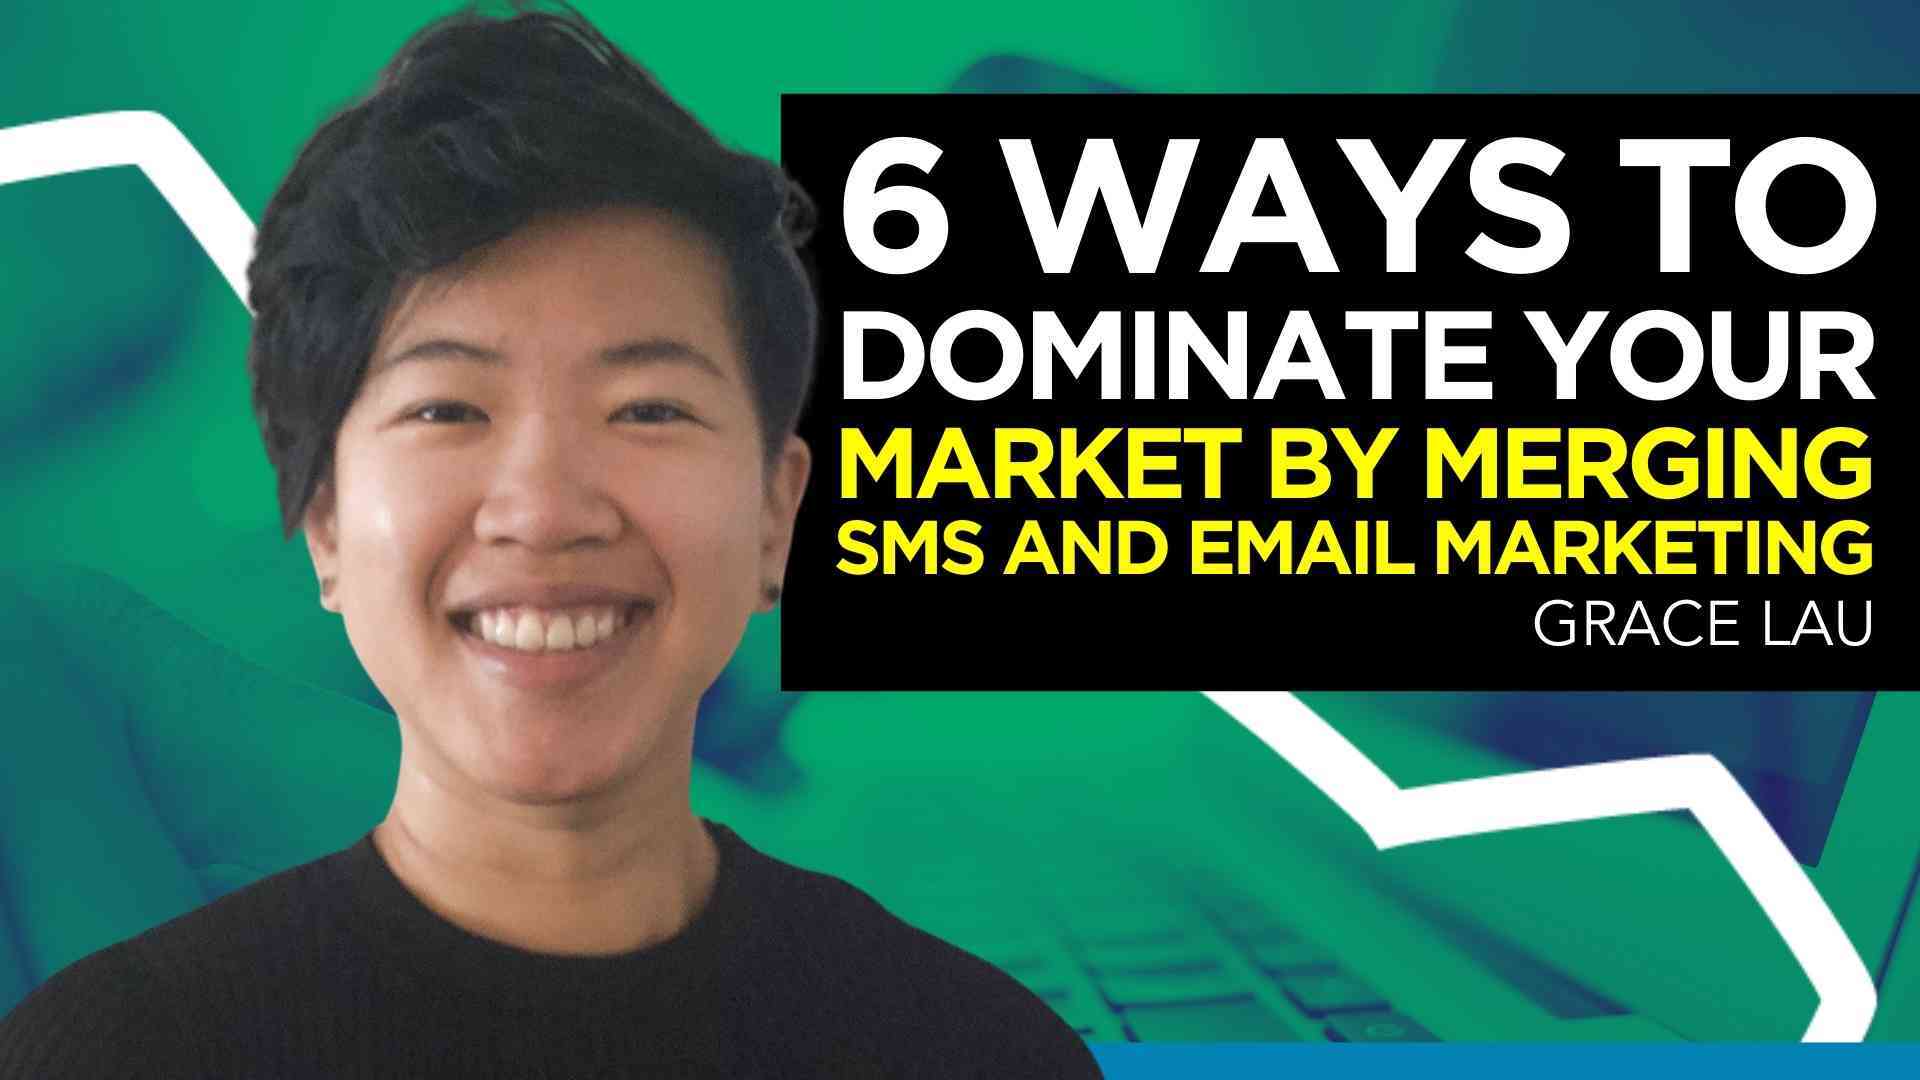 6 Ways to Dominate Your Market by Merging SMS and Email Marketing